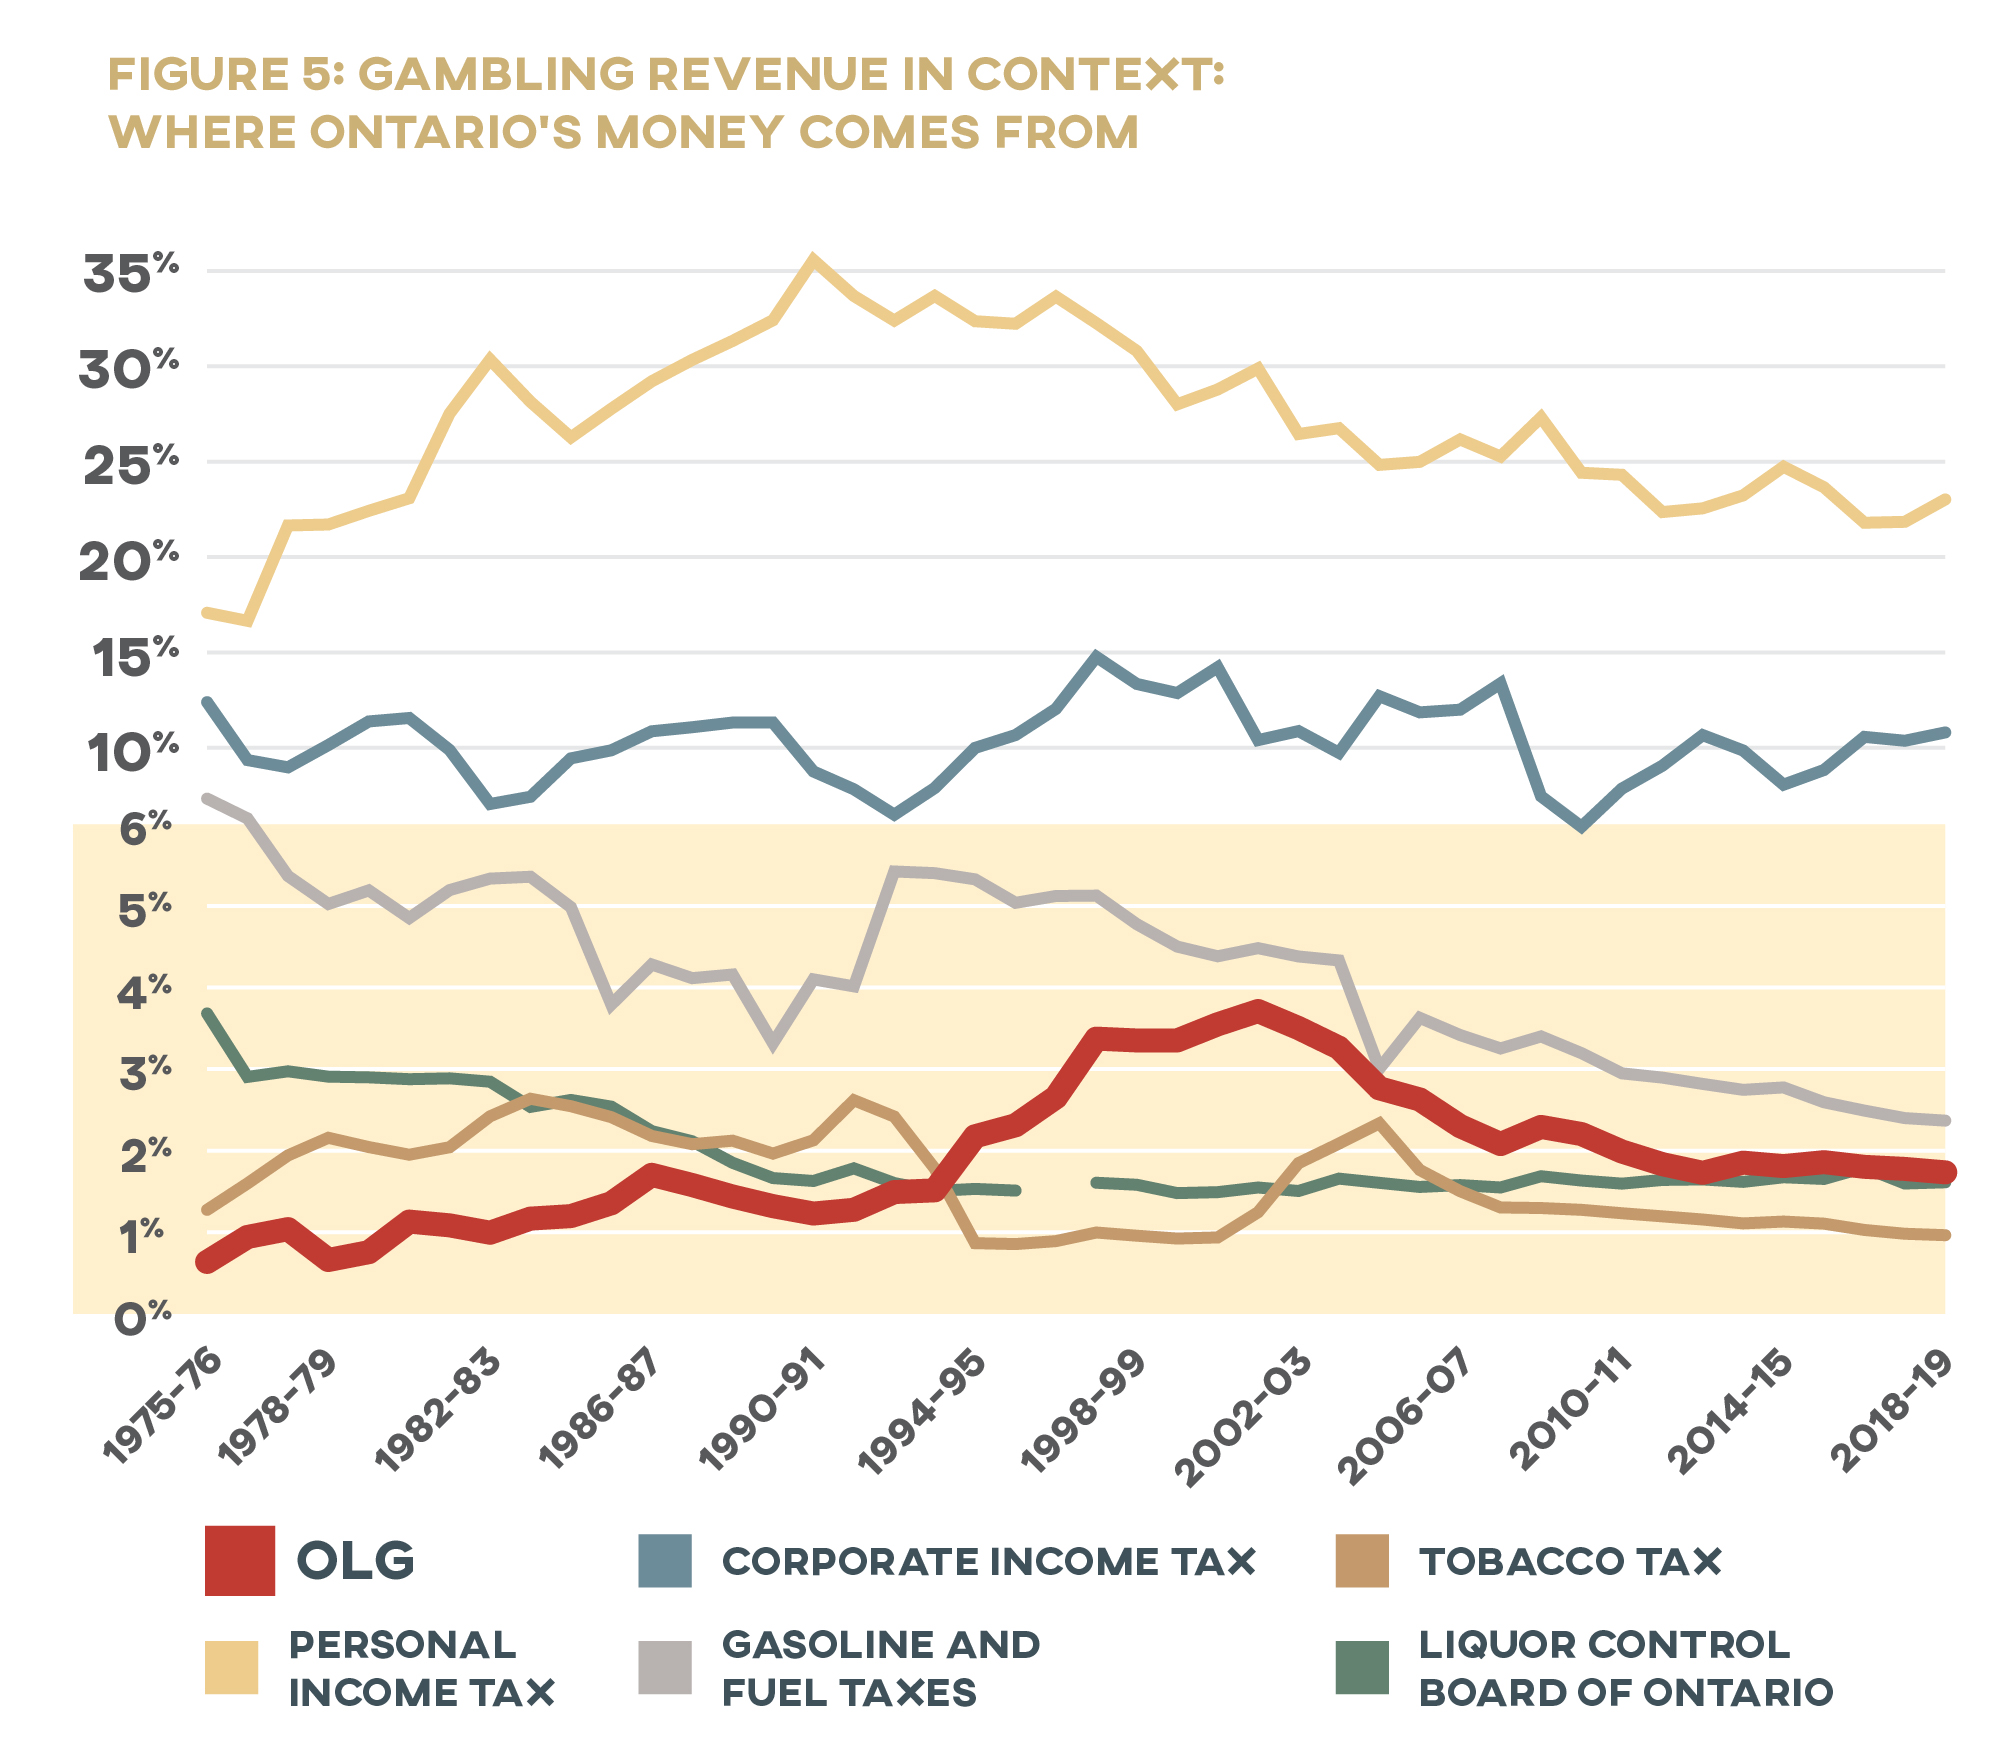 Figure 5: Gambling Revenue in Context: Where Ontario's Money Comes From